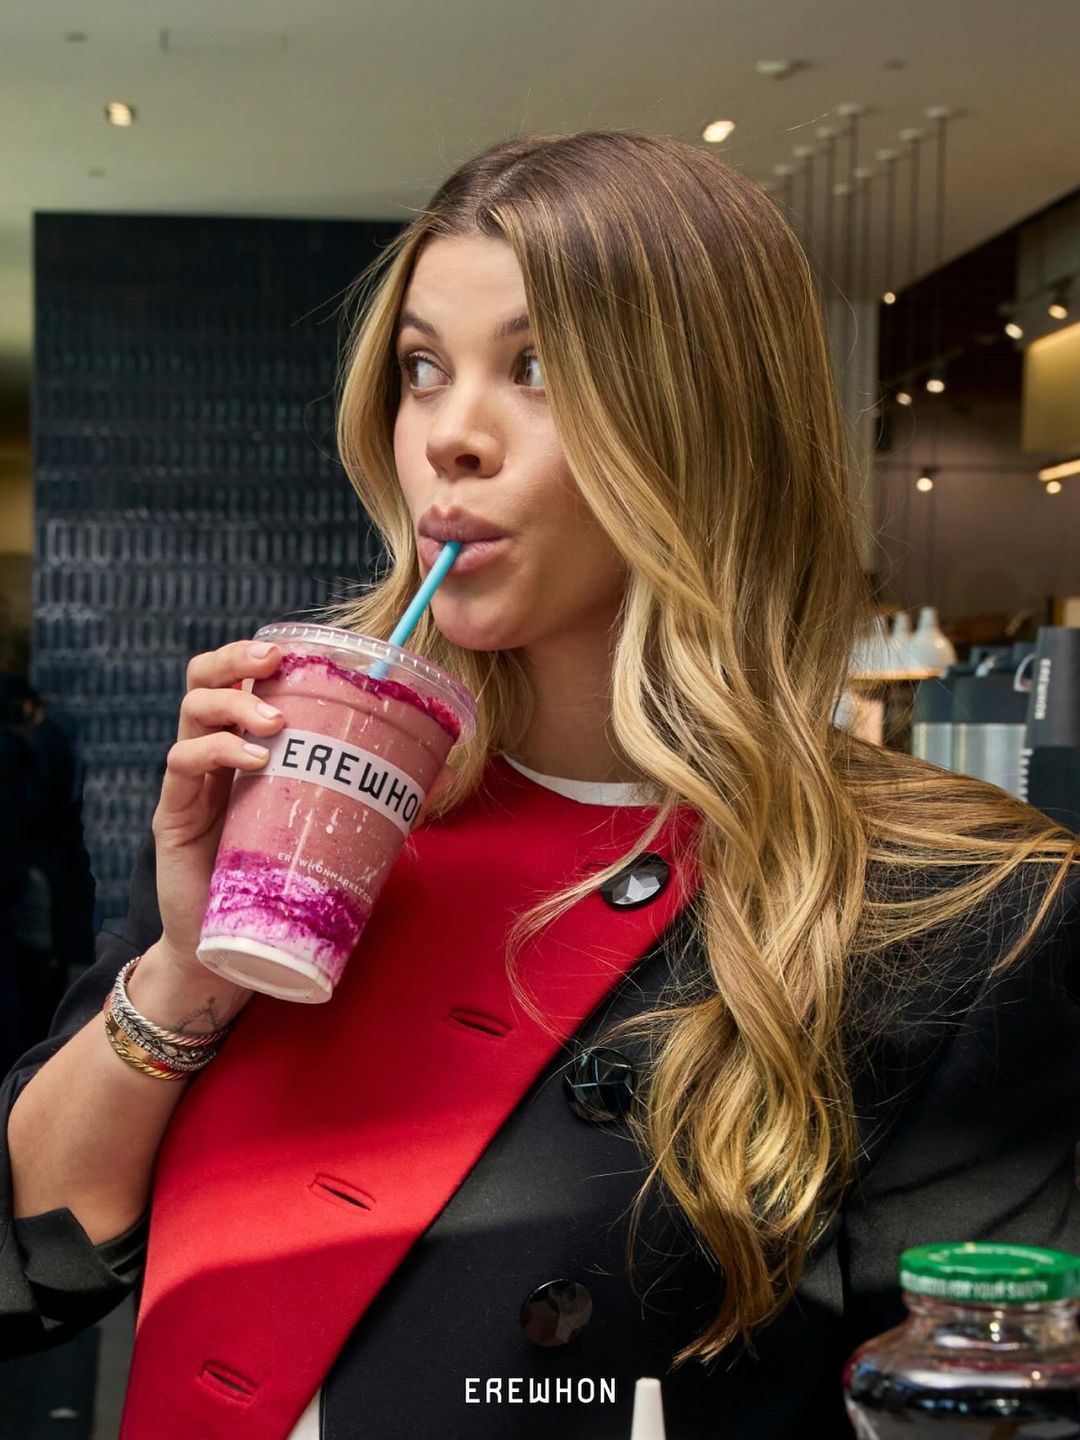 Sofia Richie poses with her Erewhon smoothie